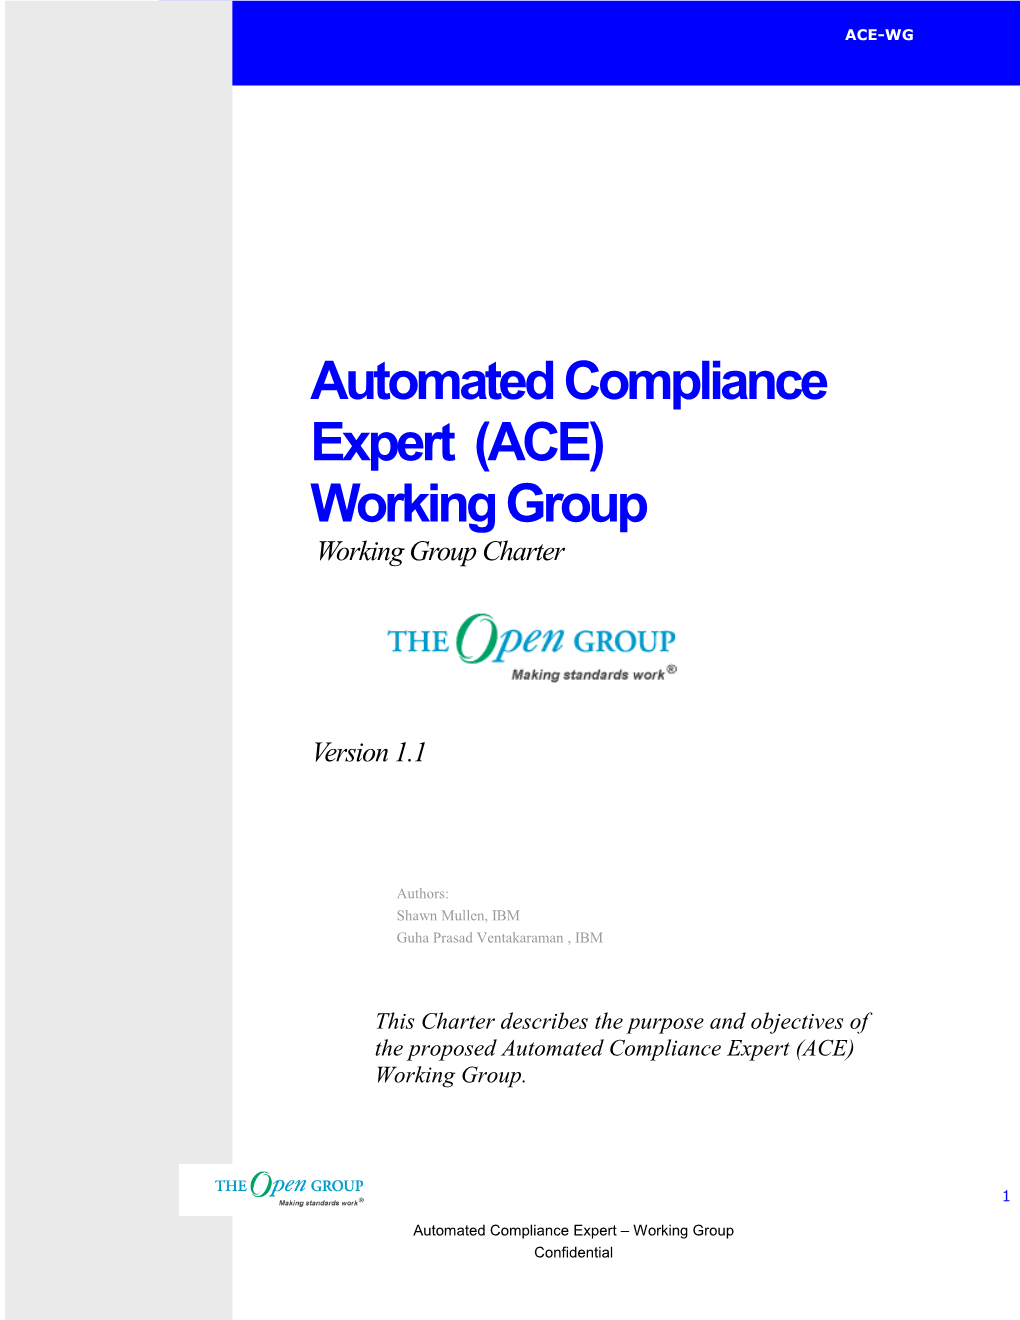 Automated Compliance Expert Working Group Charter